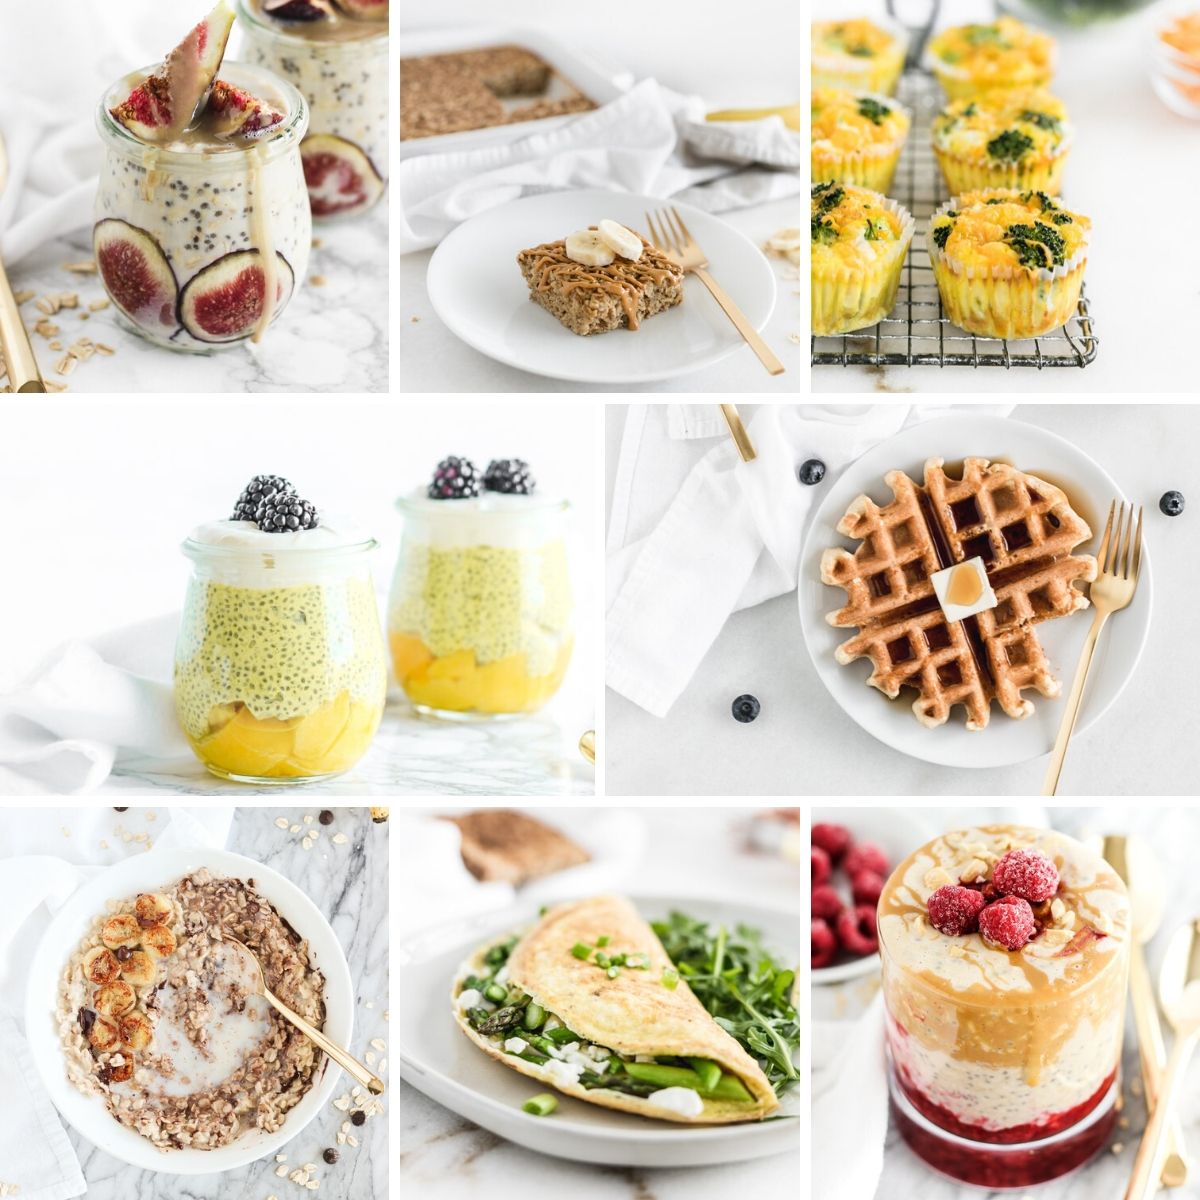 Healthy Breakfast Recipes With 7 Ingredients or Less - Lively Table